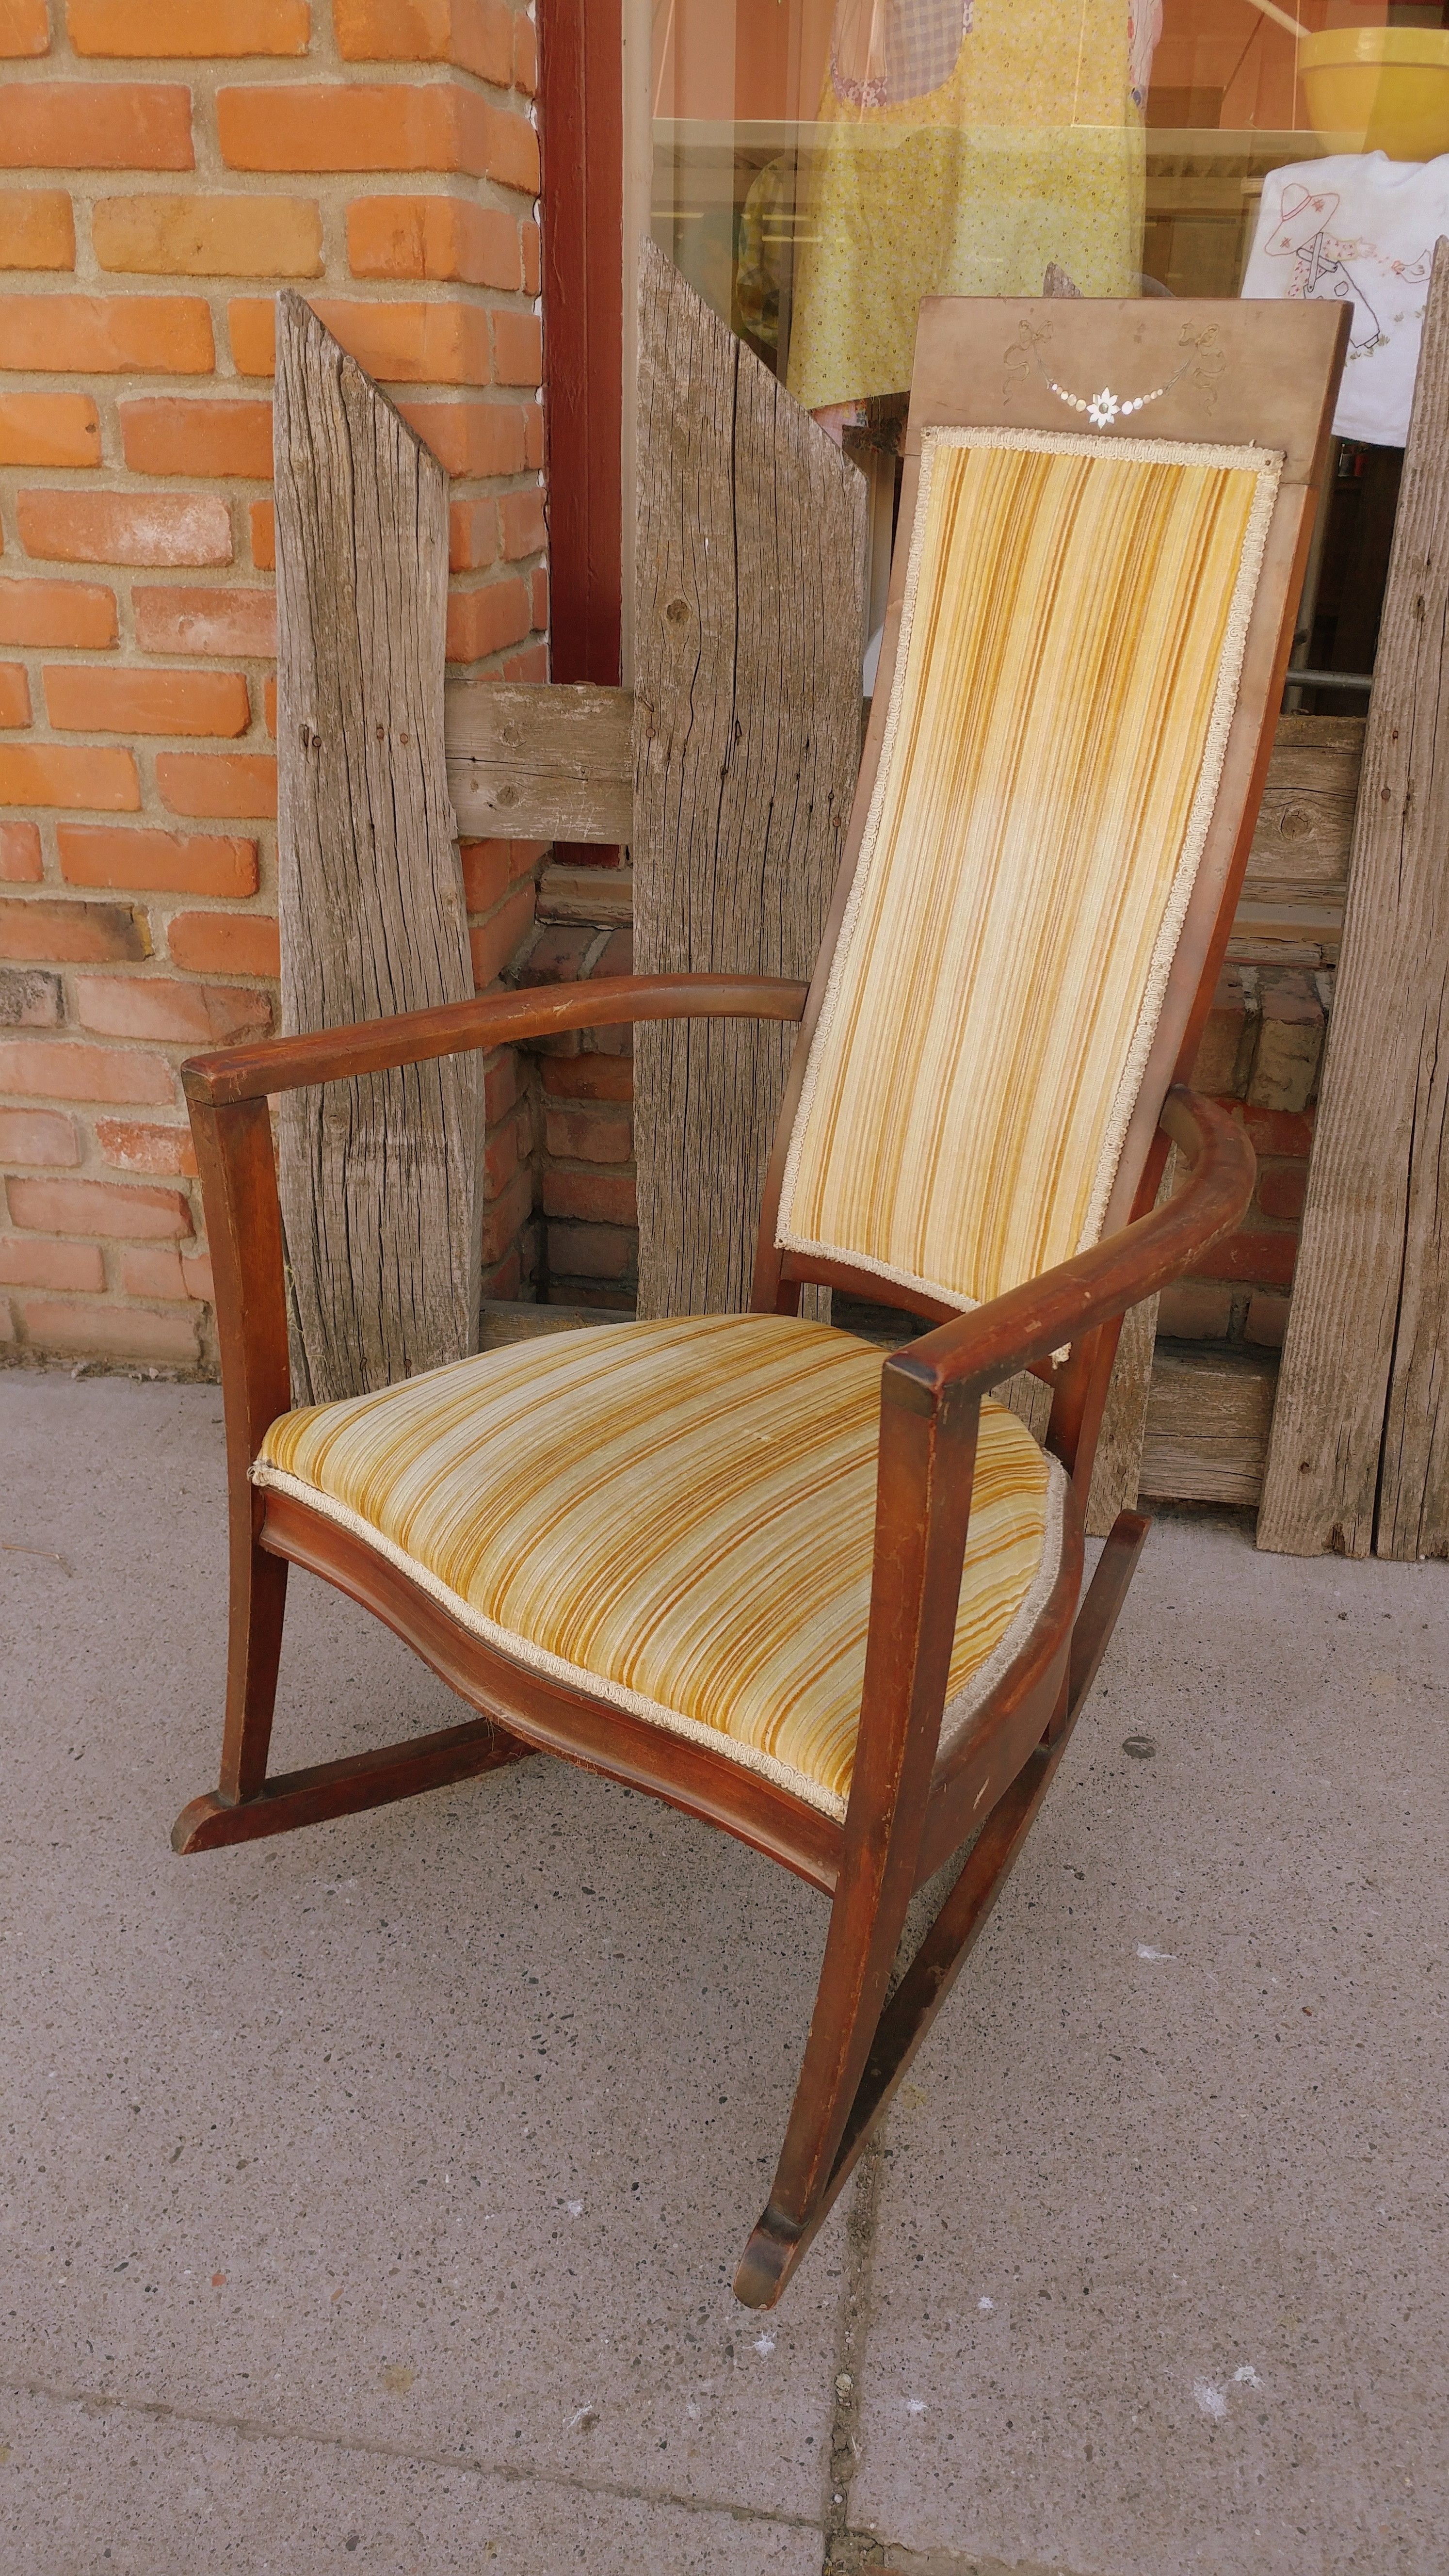 Antique Rocking Chair | Casey Girl Designs With Regard To Antique Rocking Chairs (Photo 15 of 15)